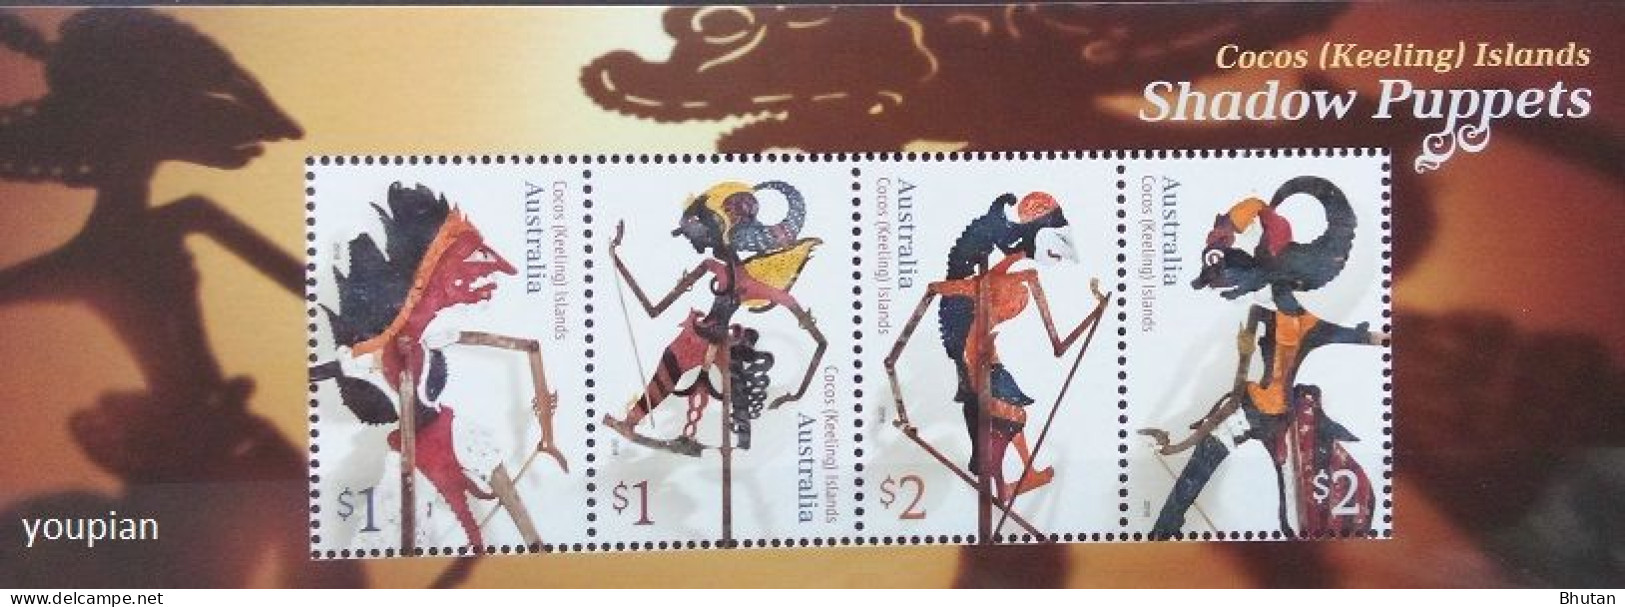 Cocos (Keeling) Islands 2018, Shadow Puppets, MNH S/S - Cocos (Keeling) Islands